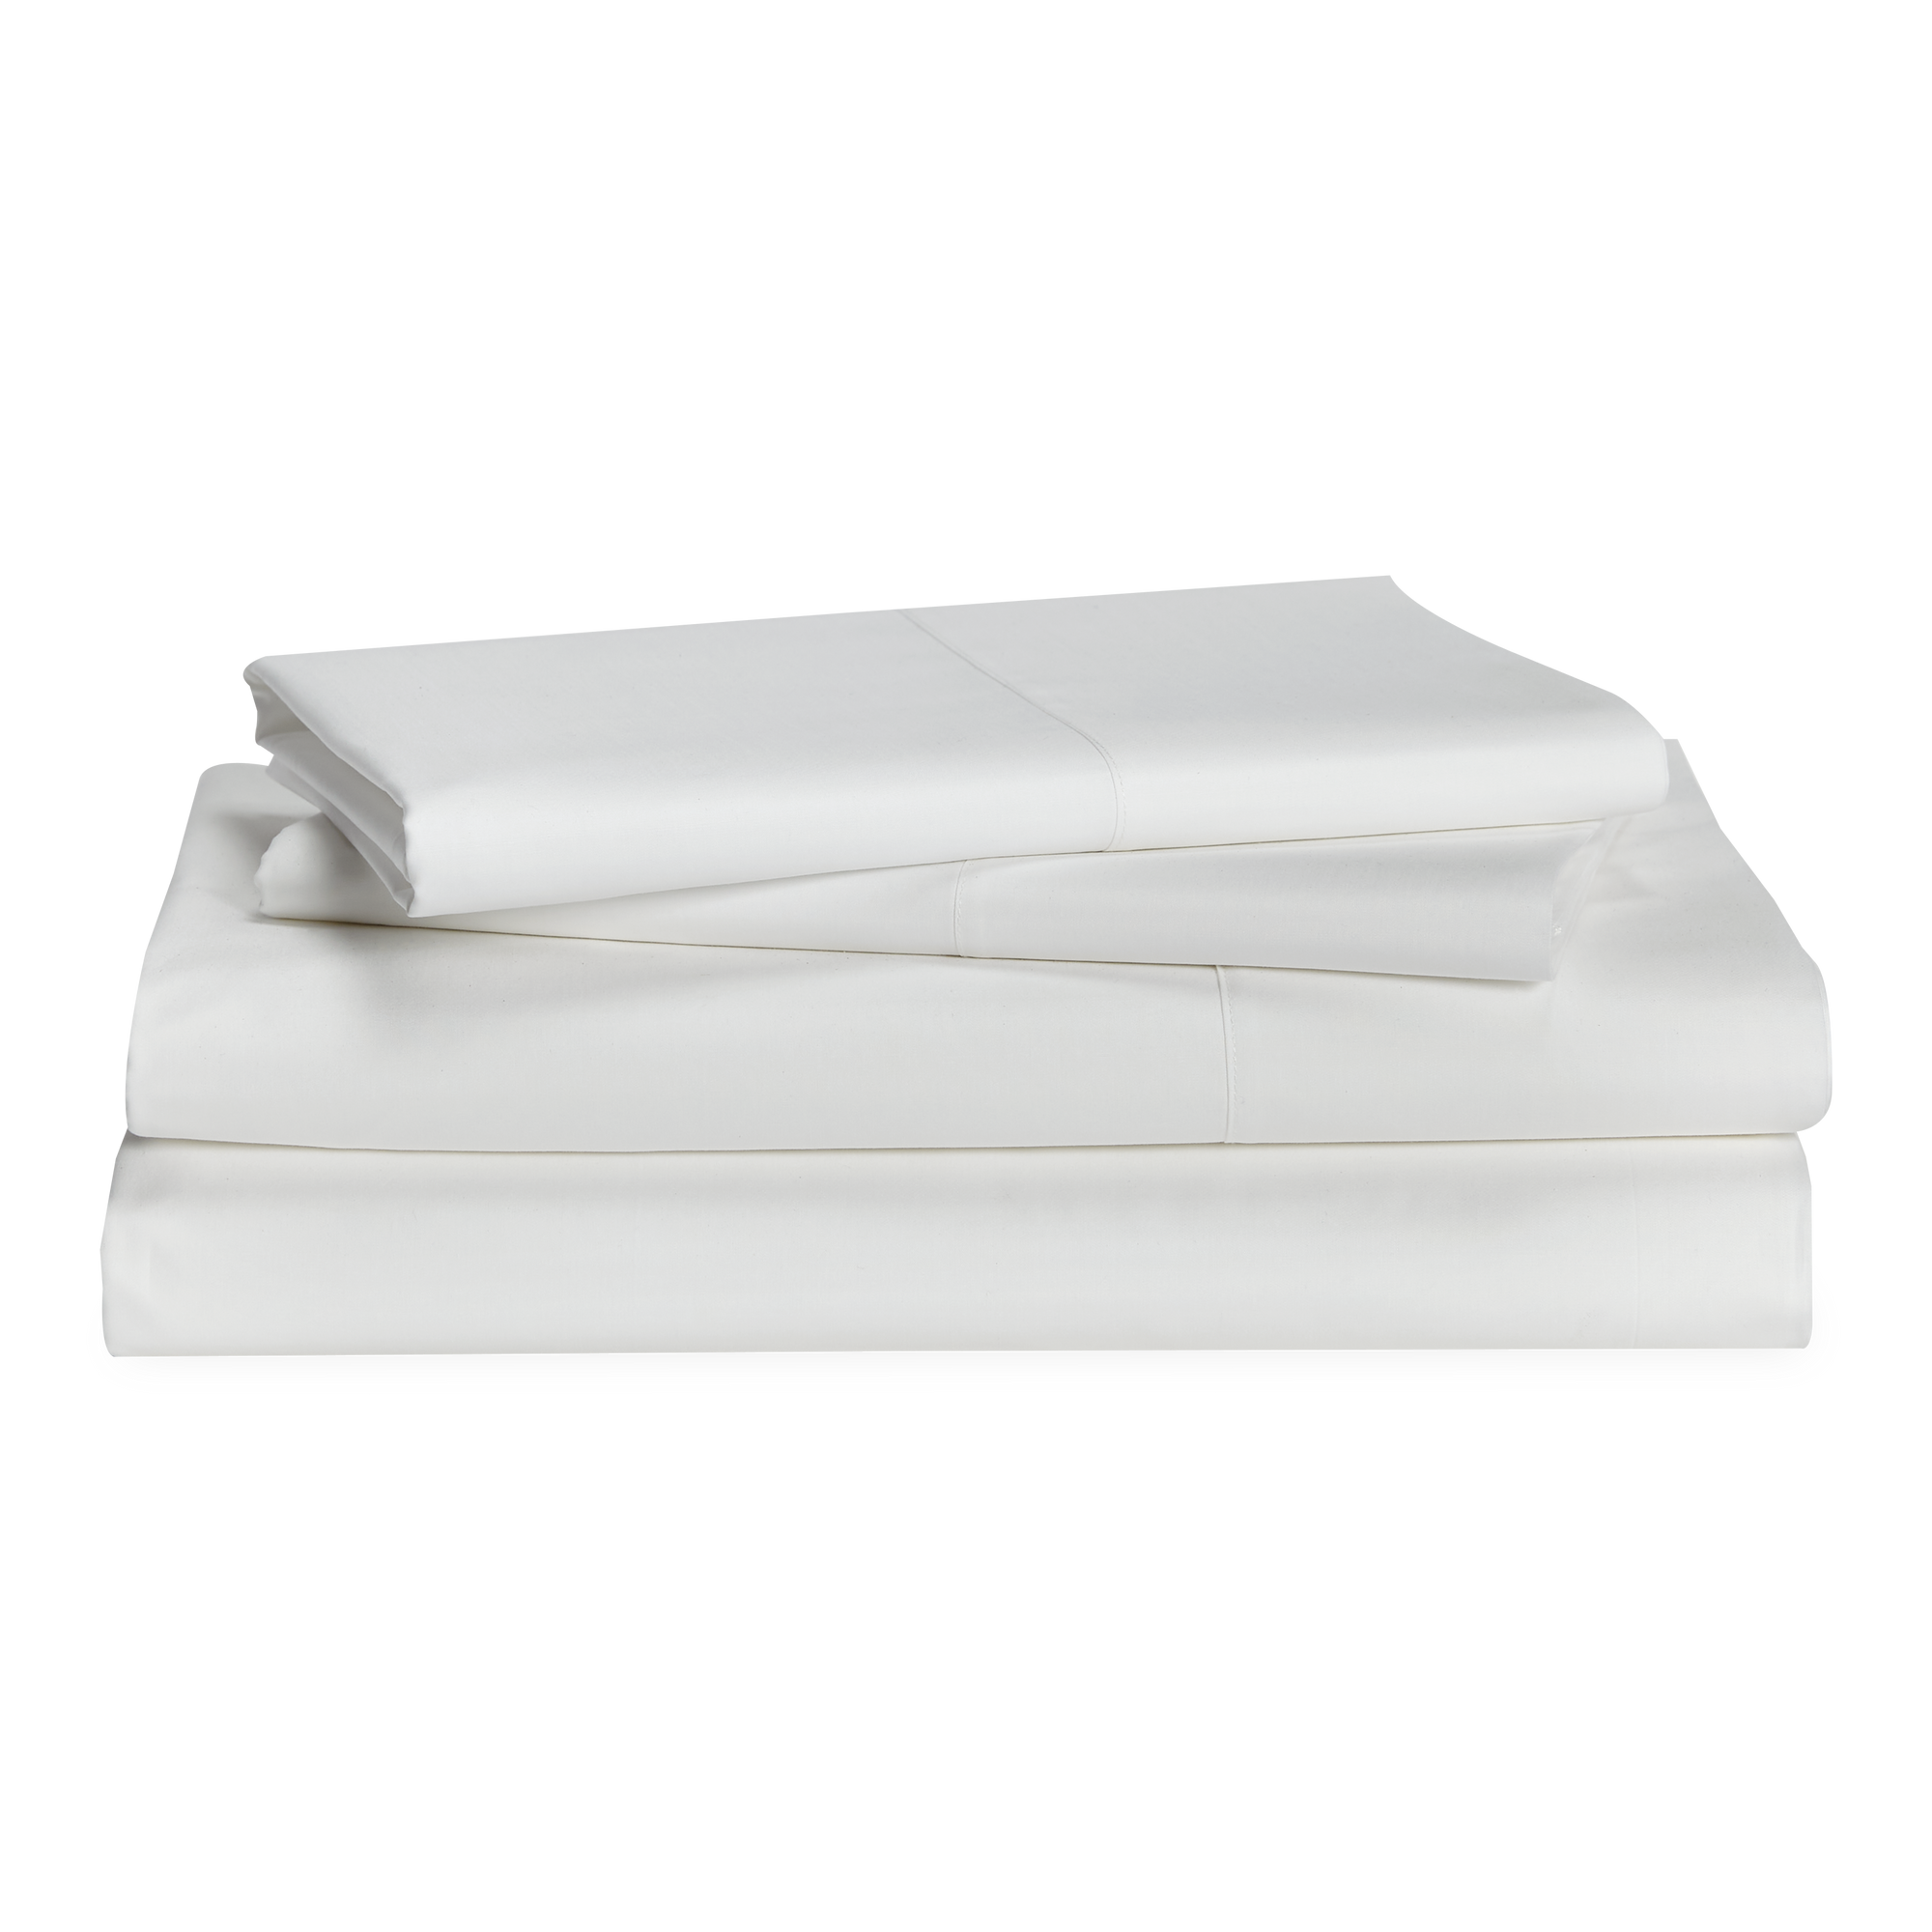 Produced in Italy exclusively for Elte, the Paradigm Collection is made from 100% cotton percale for a crisp and matte look.